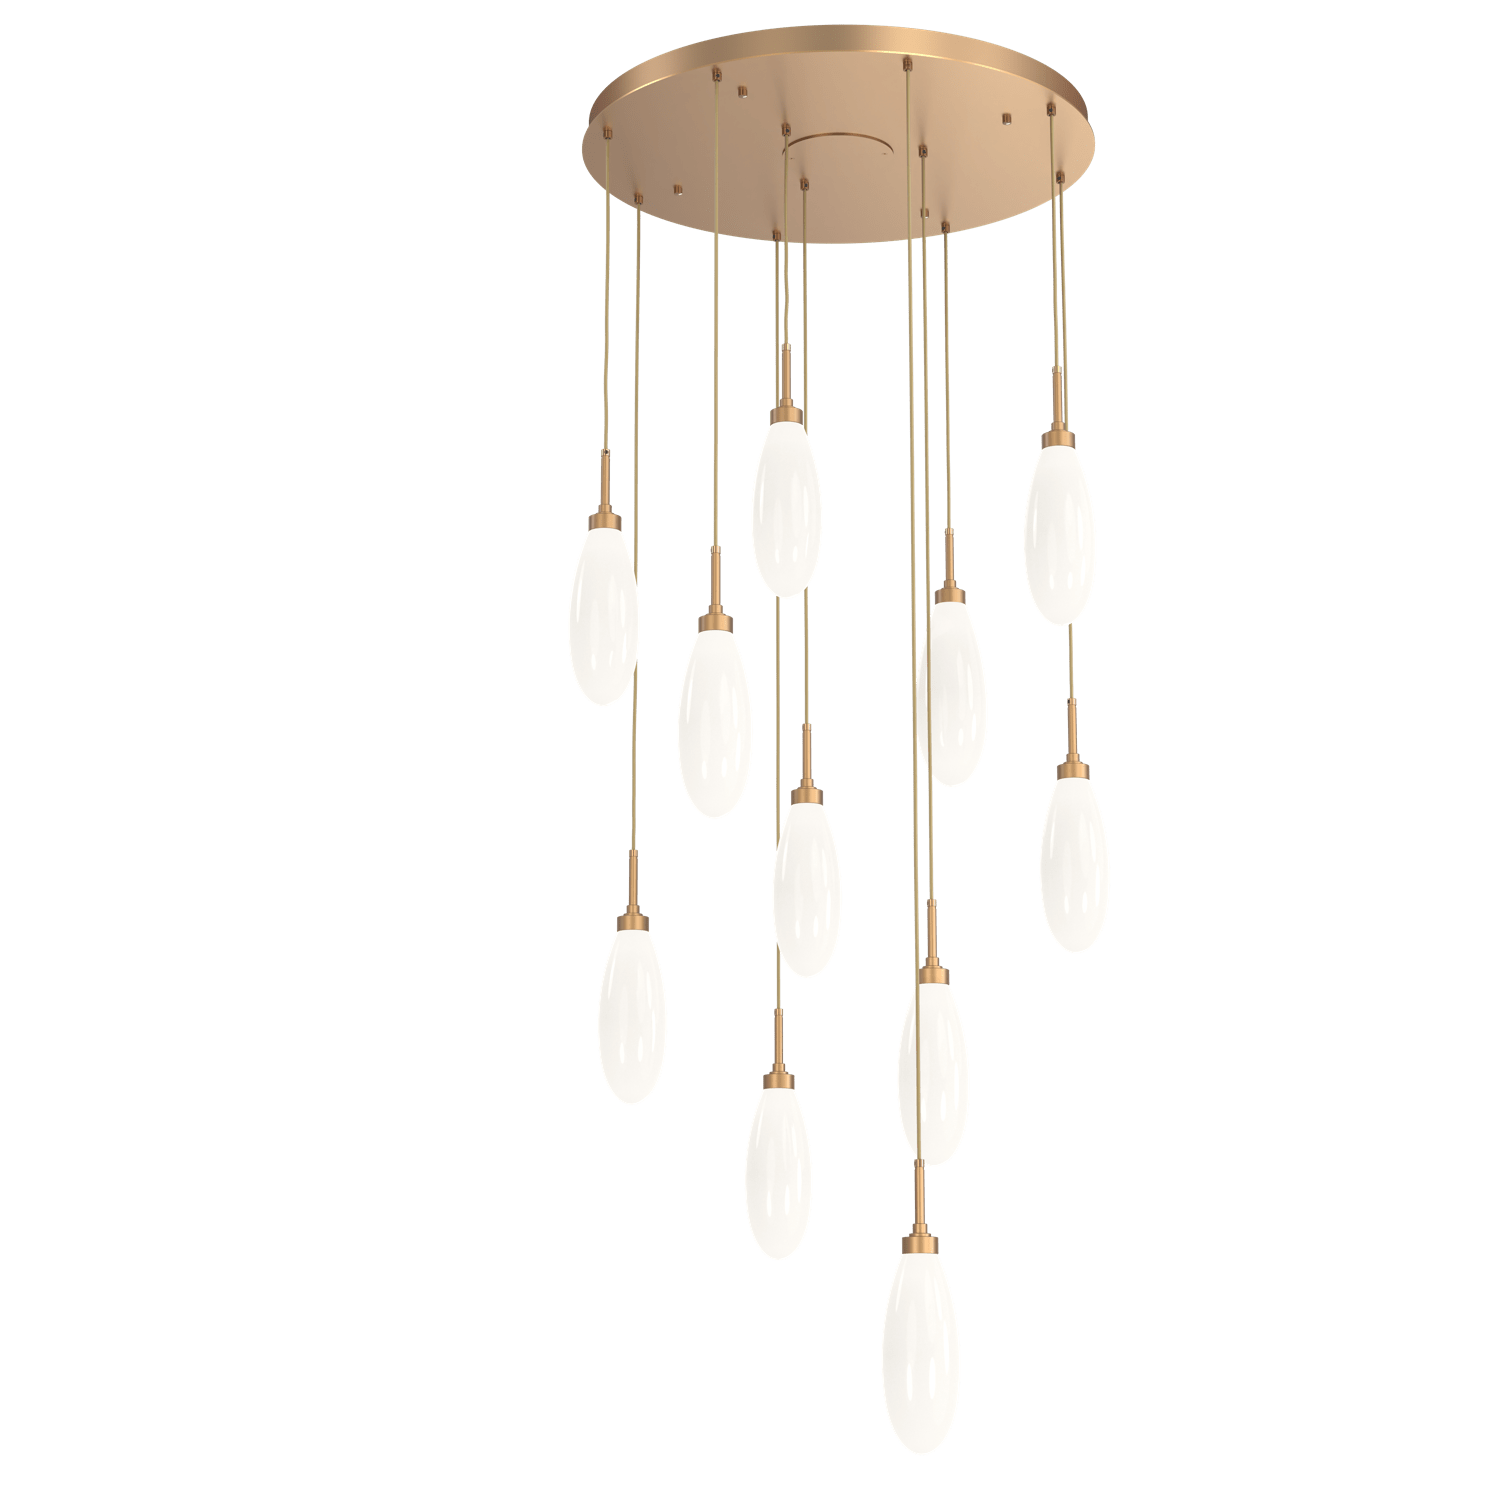 CHB0071-11-NB-WL-LL-Hammerton-Studio-Fiori-11-light-round-pendant-chandelier-with-novel-brass-finish-and-opal-white-glass-shades-and-LED-lamping